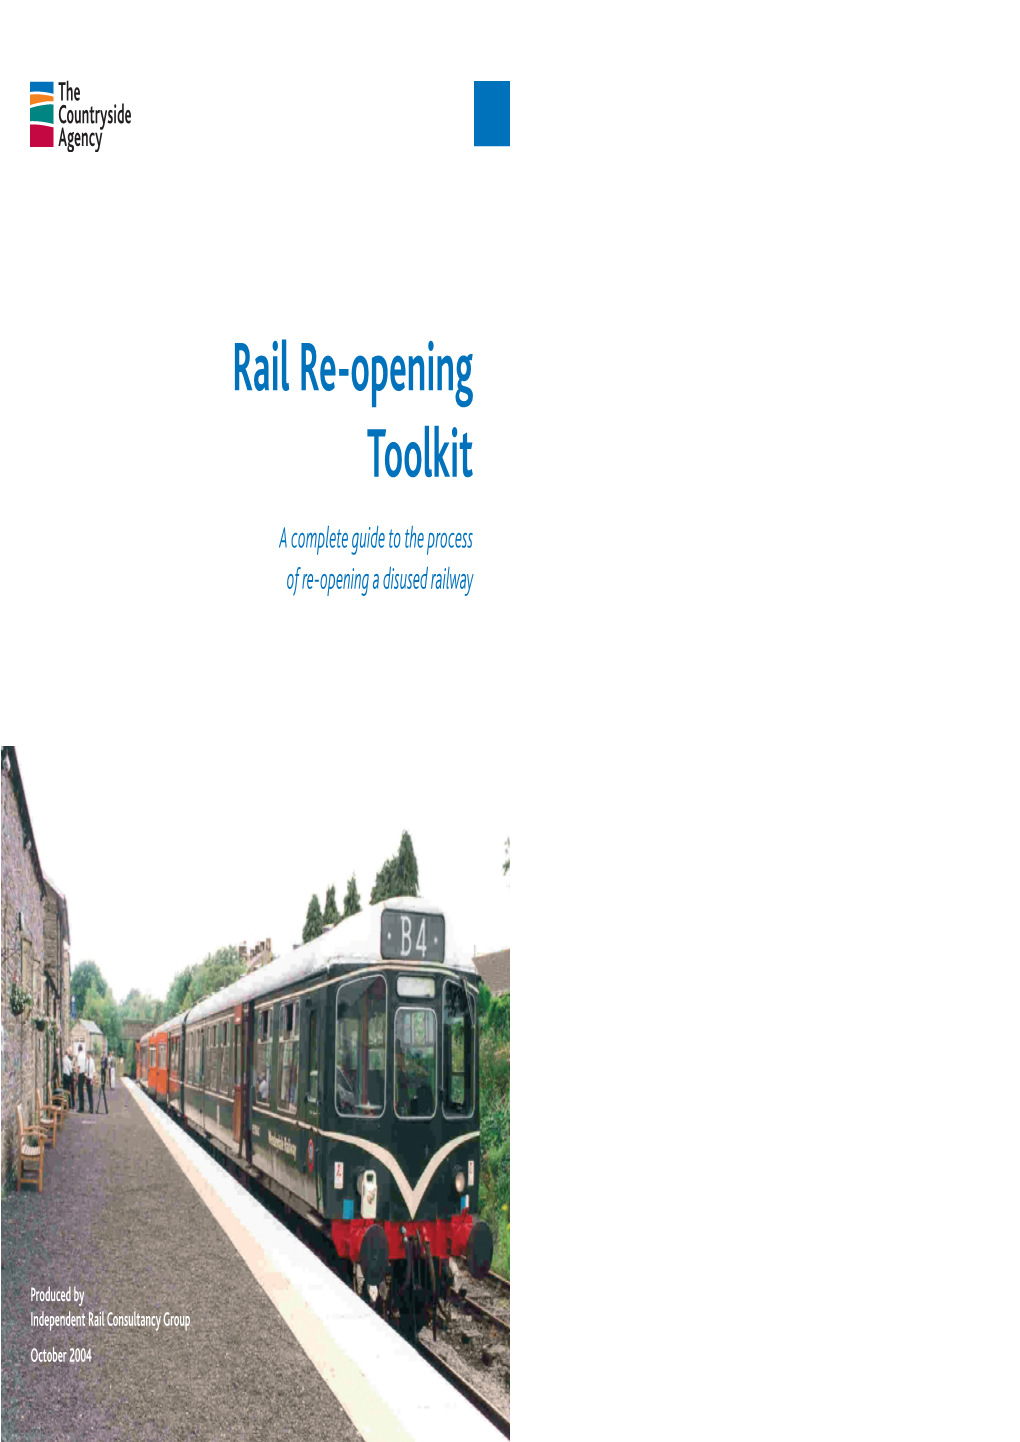 Rail Re-Opening Toolkit a Complete Guide to the Process of Re-Opening a Disused Railway